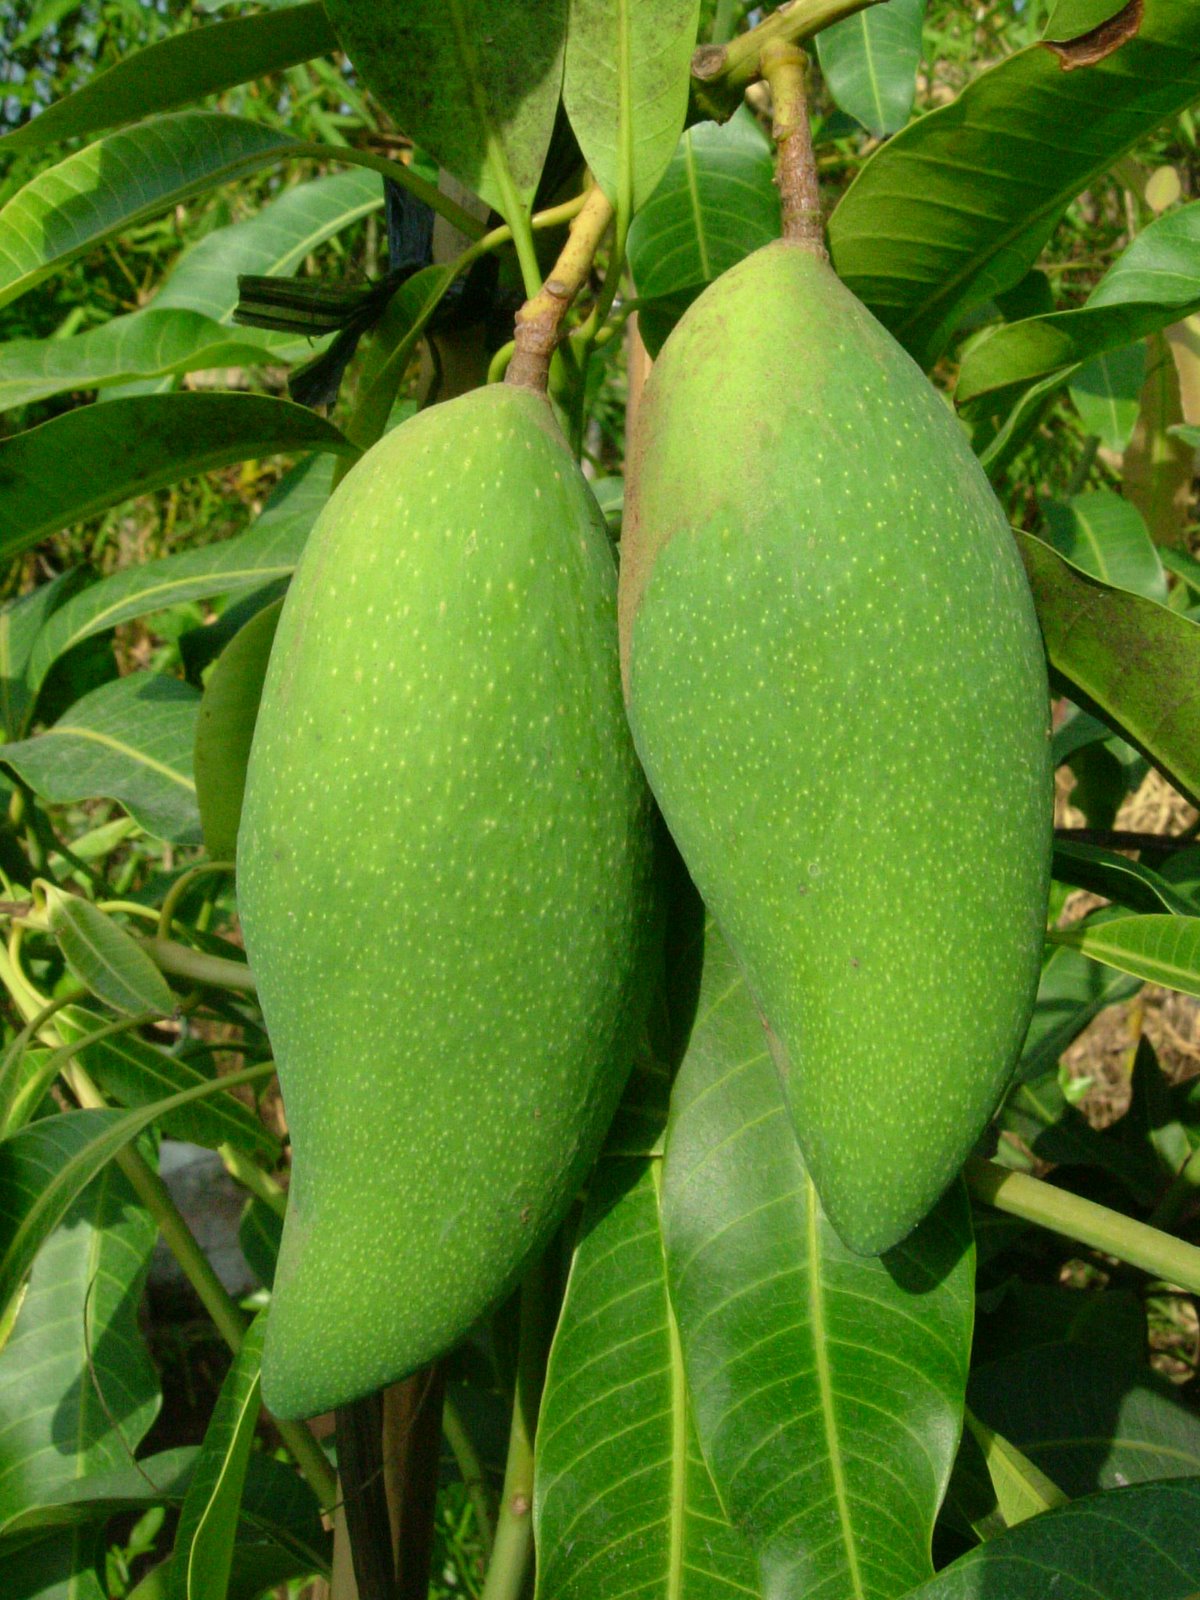 History Of Mango in the workd